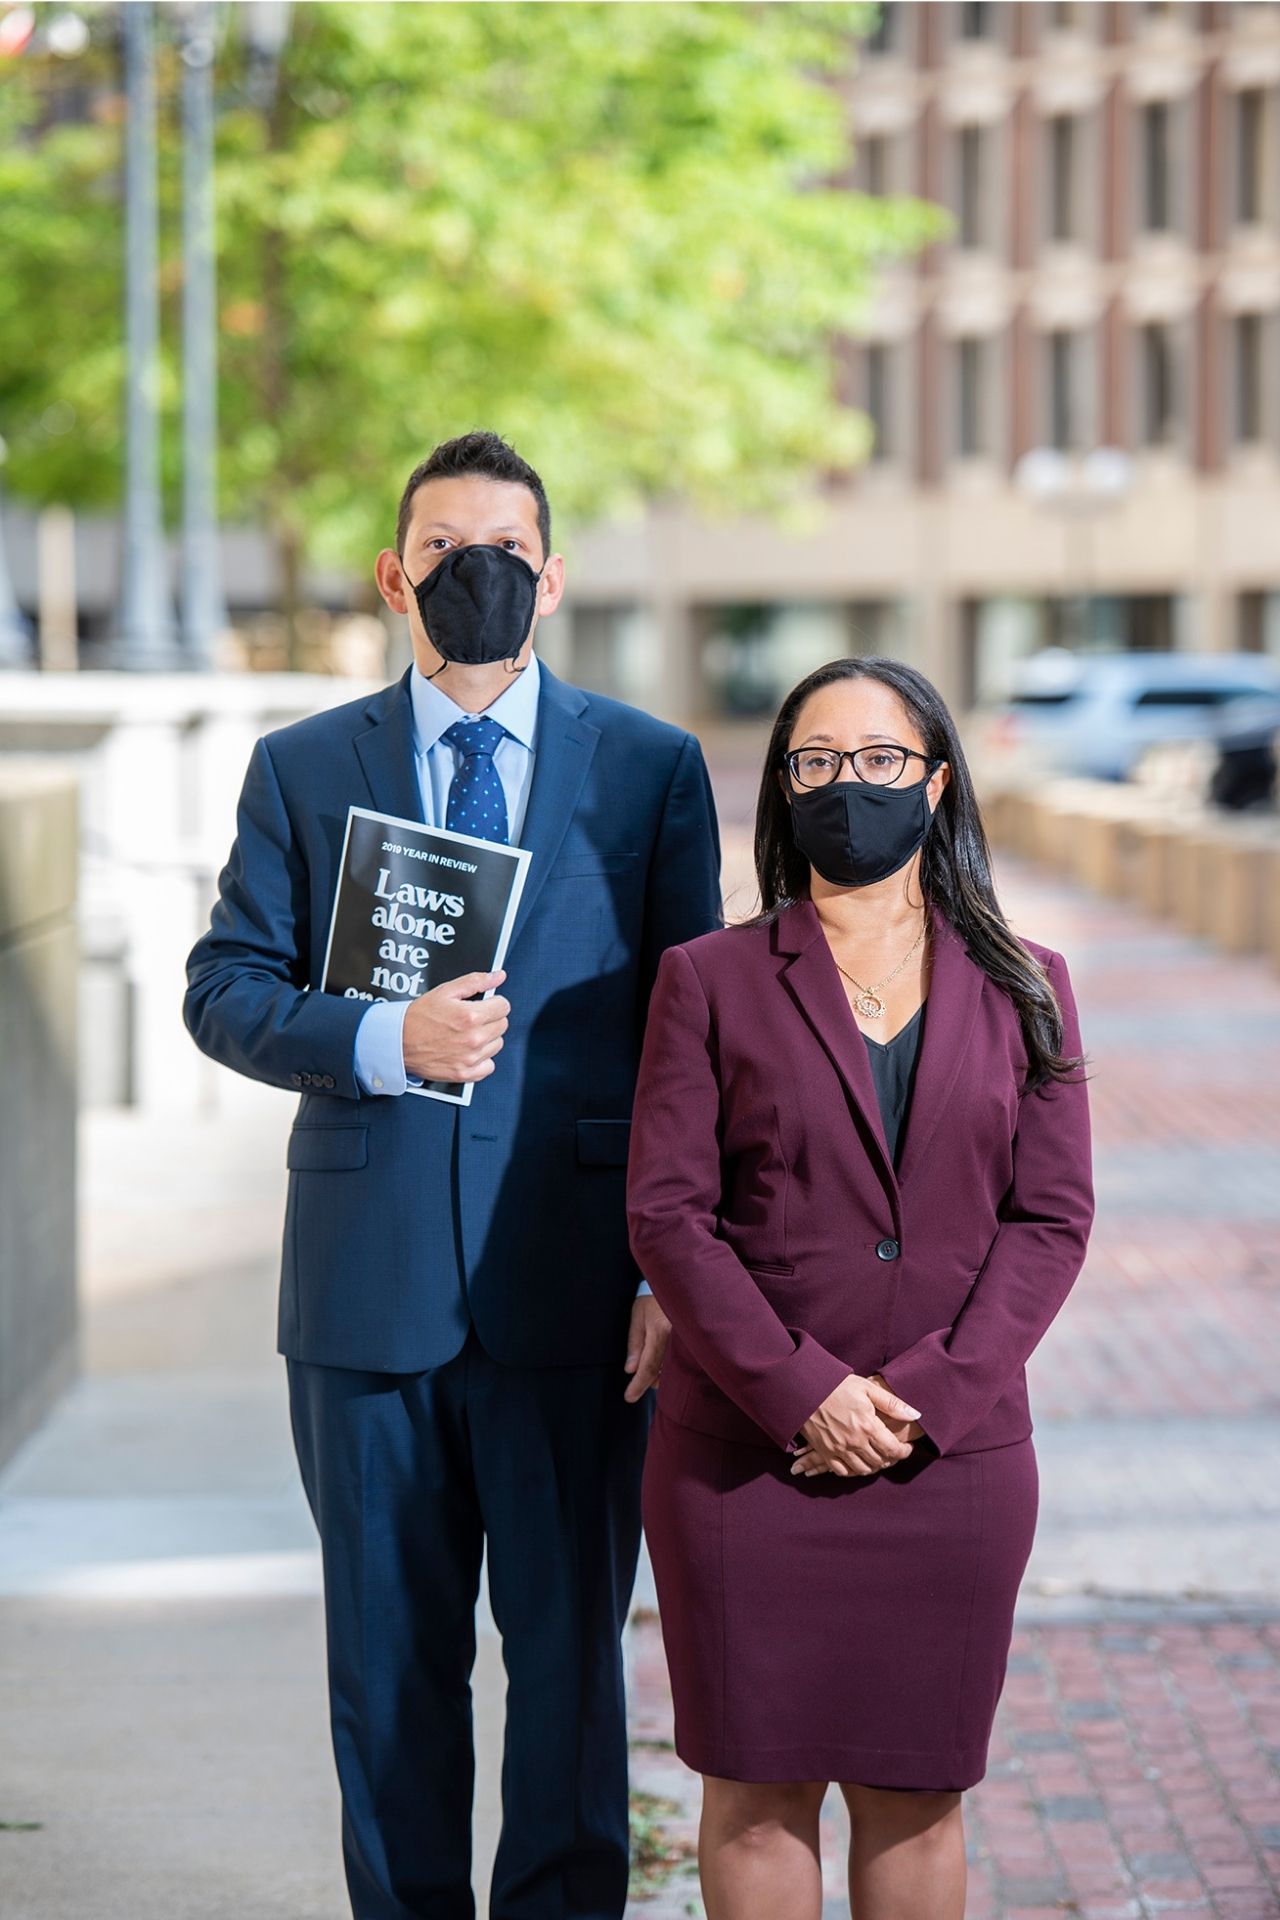 Sophia Hall and Ivan Espinoza Madrigal standing side by side outside in Government Center on a brick walkway. Sophia is wearing a purple blazer and skirt with black shirt. Ivan wearing a dark blue suit and tie and light blue collared shirt. He's holding a black booklet with white text on the cover that says "Laws alone are not enough." Sophia has her hands folded at her waist. They are both wearing black cloth face masks.